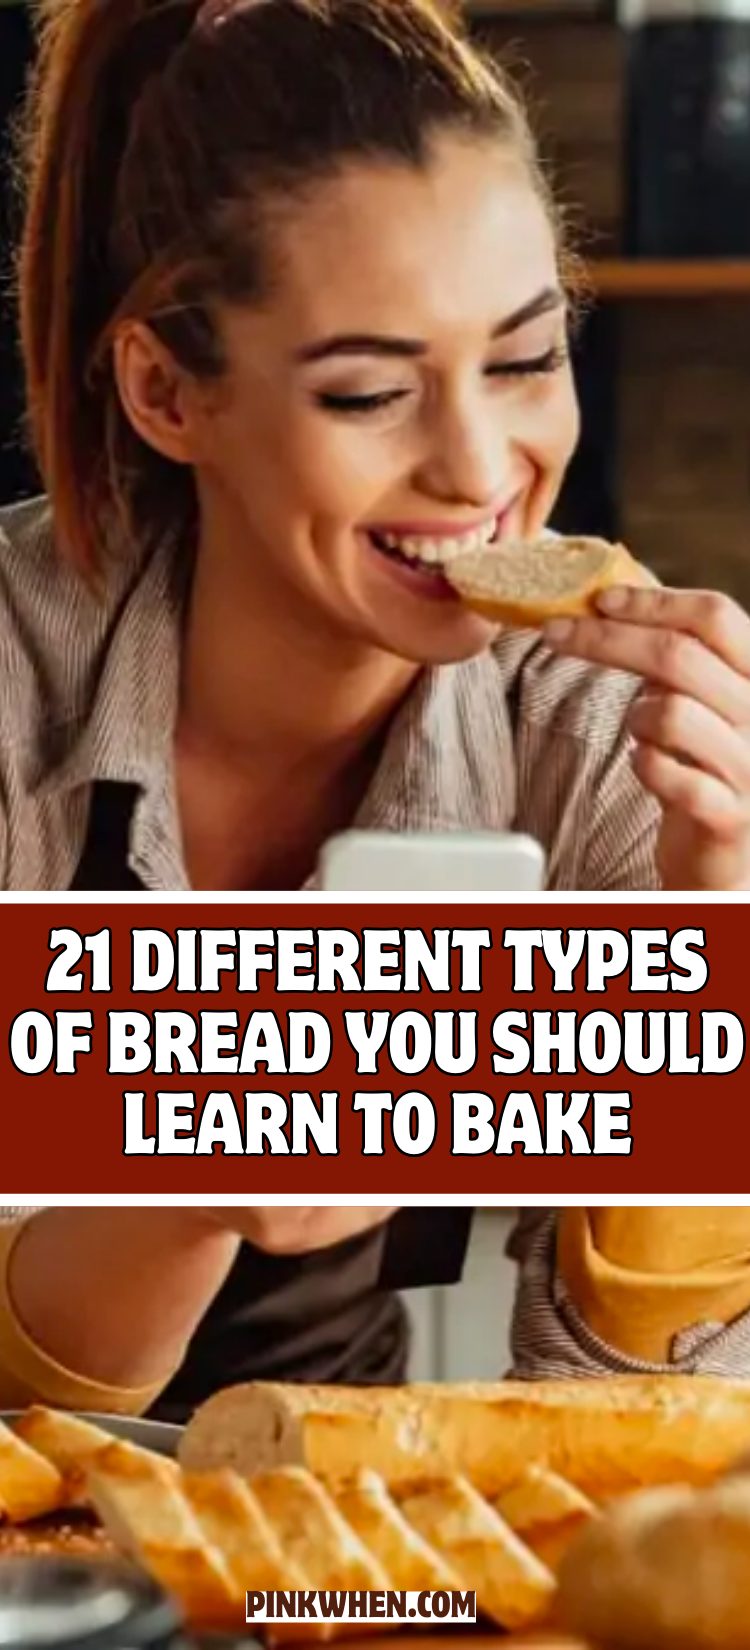 21 Different Types of Bread You Should Learn to Bake 